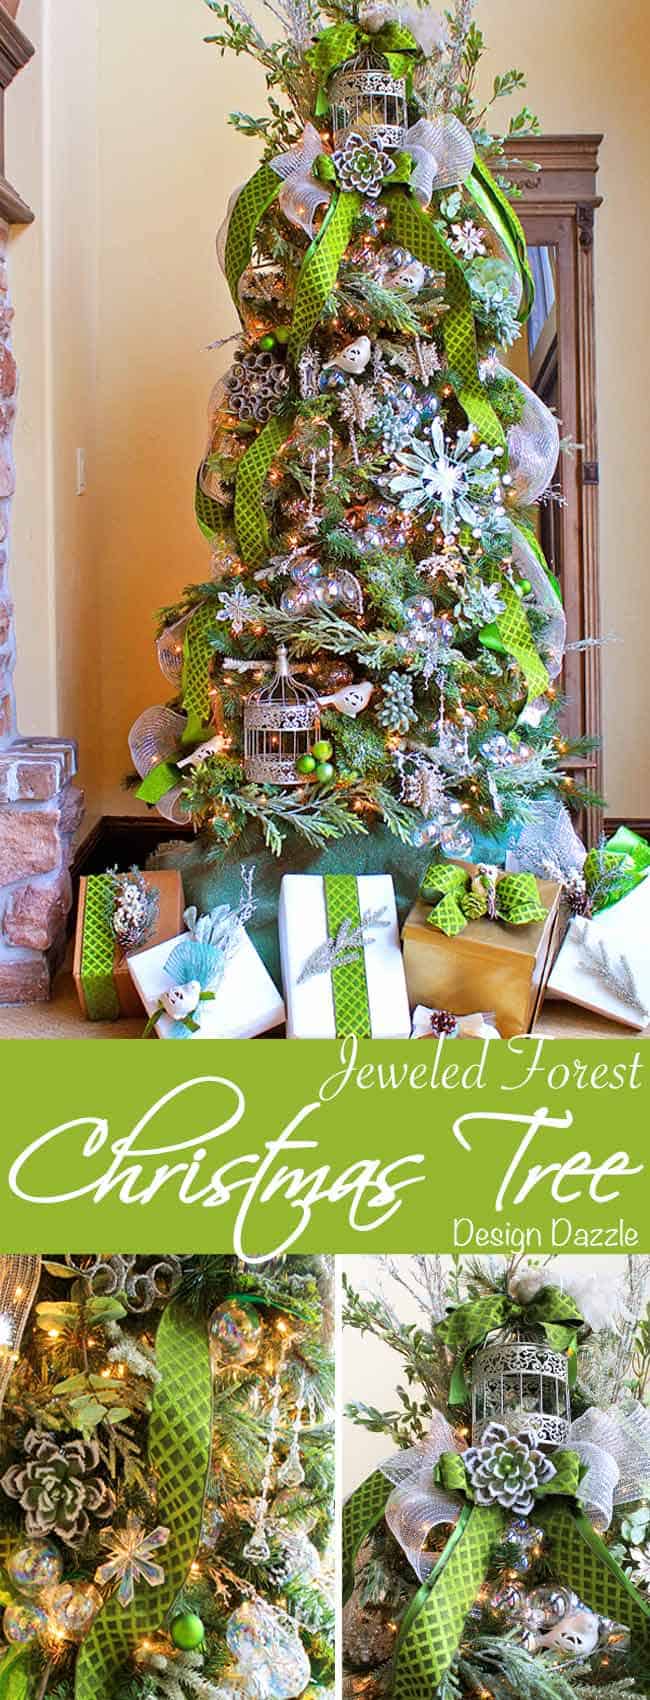 The Jeweled Forest Christmas tree by Toni of Design Dazzle. Beautiful jewels, baubles, greenery, succulents, moss, birds and more! 